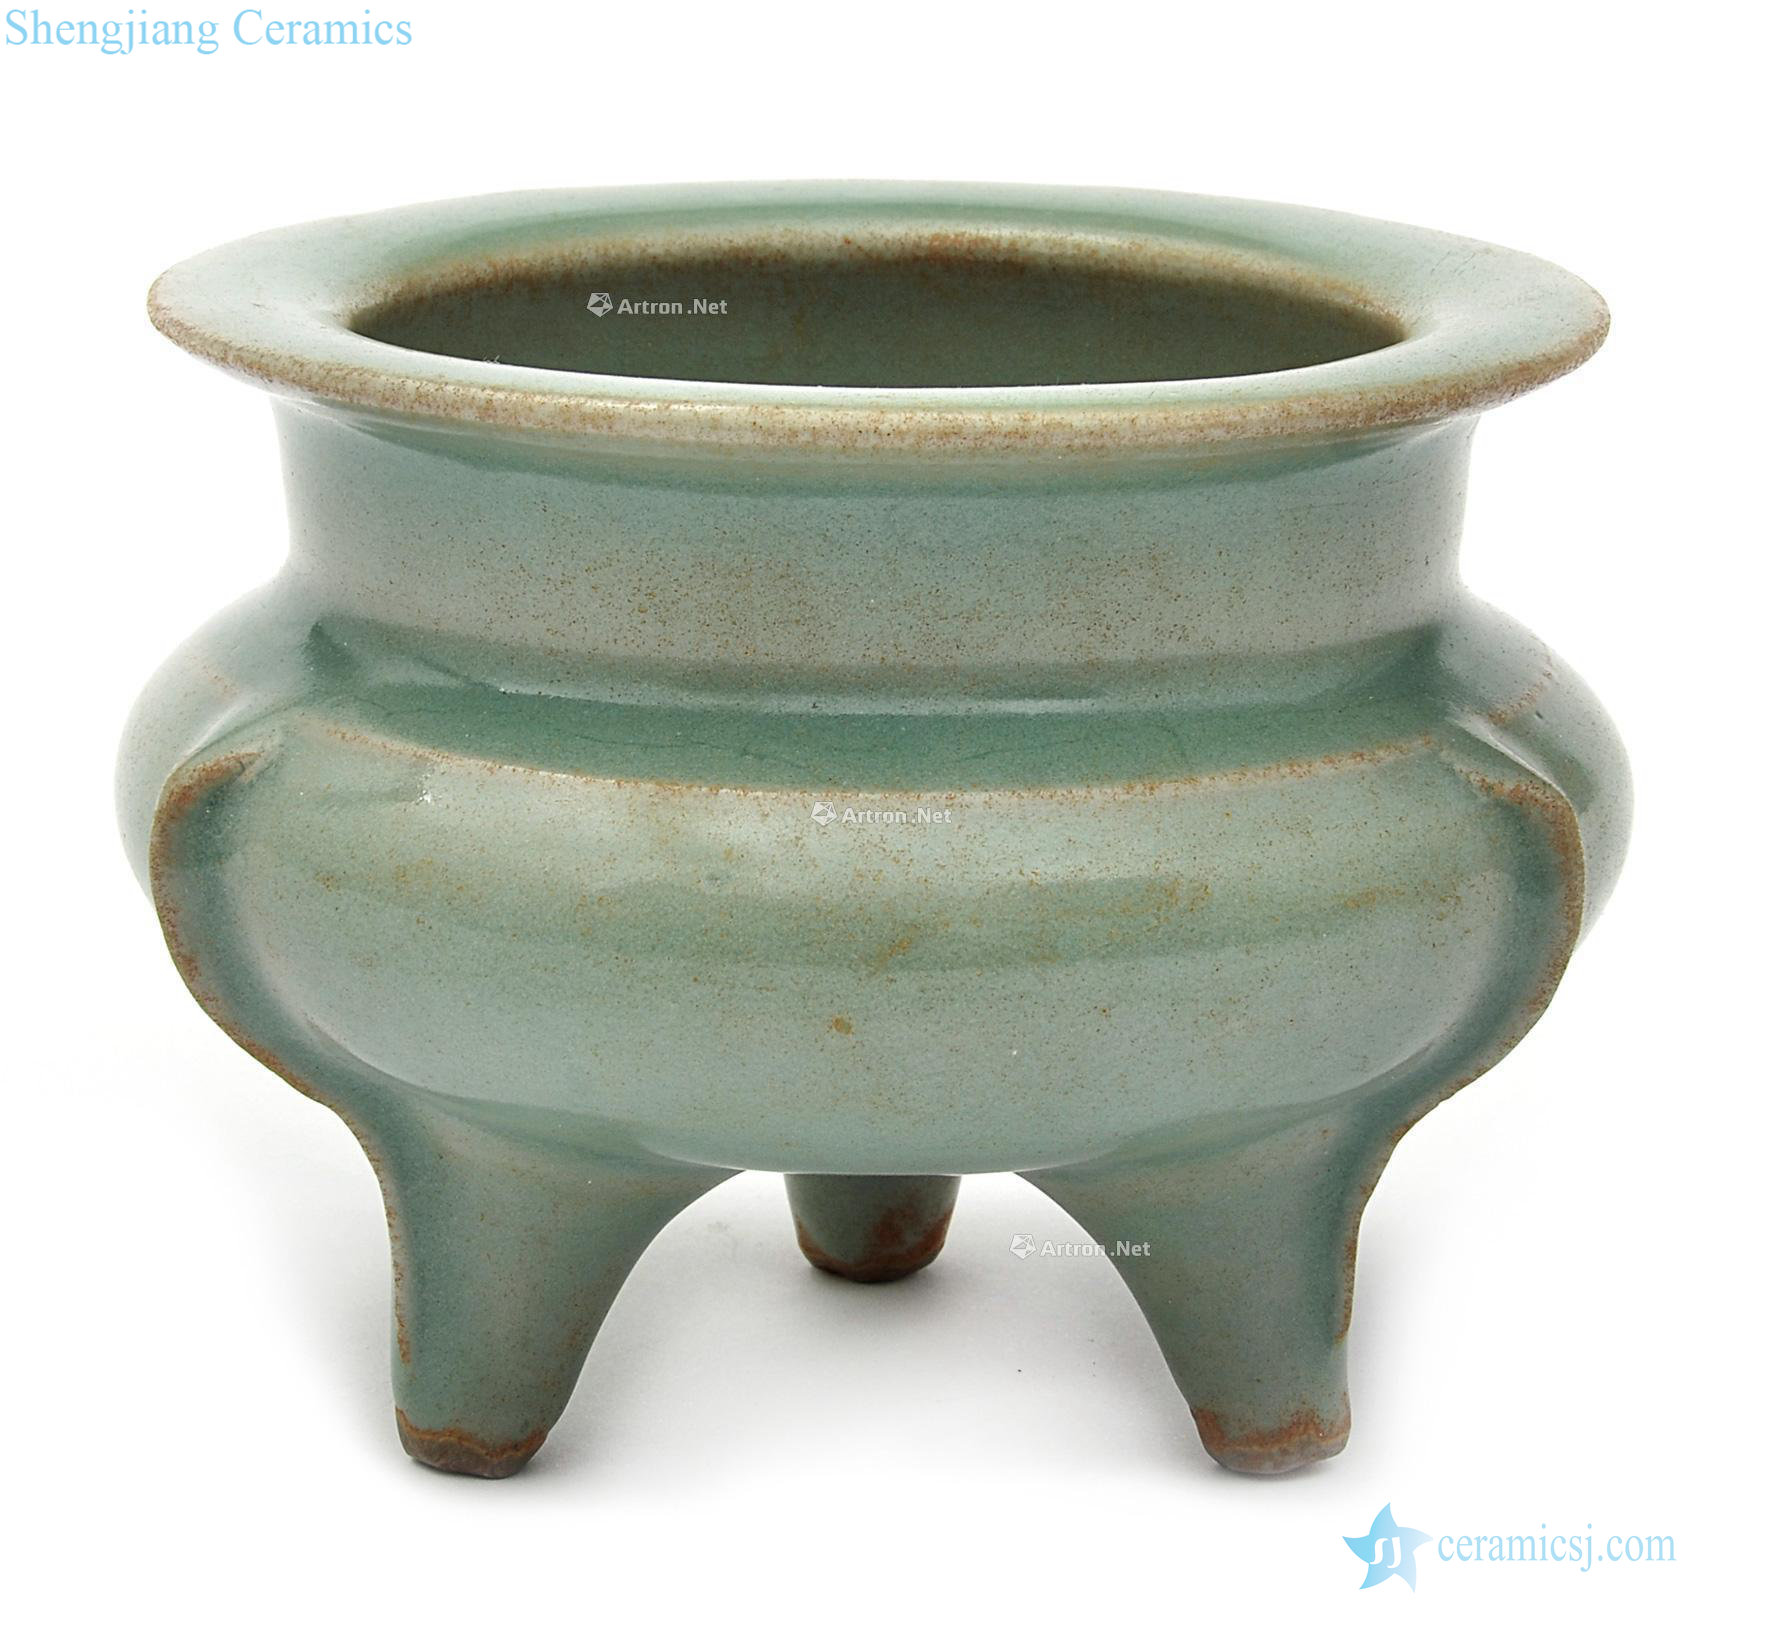 The song dynasty longquan celadon by type furnace with three legs